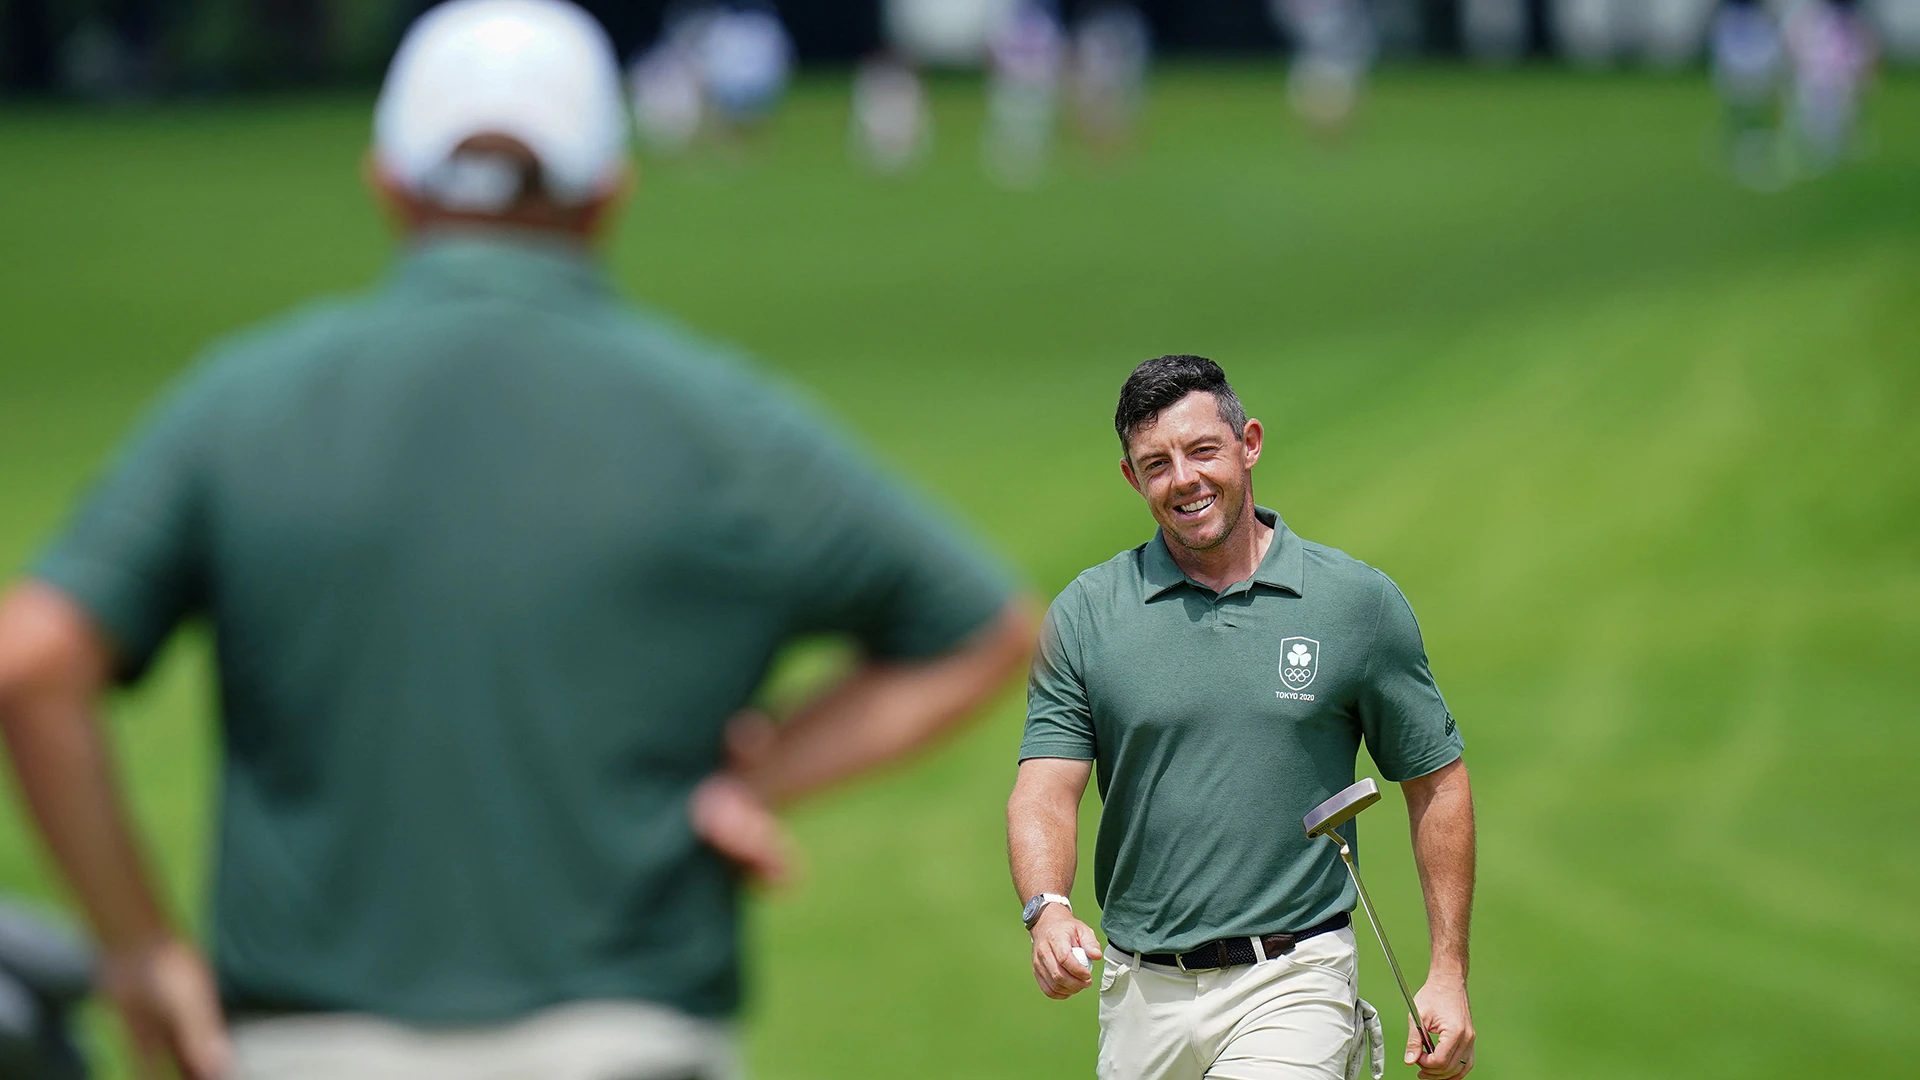 Two’s better than one: Rory McIlroy, Shane Lowry have Ireland feeling lucky entering Olympics finish